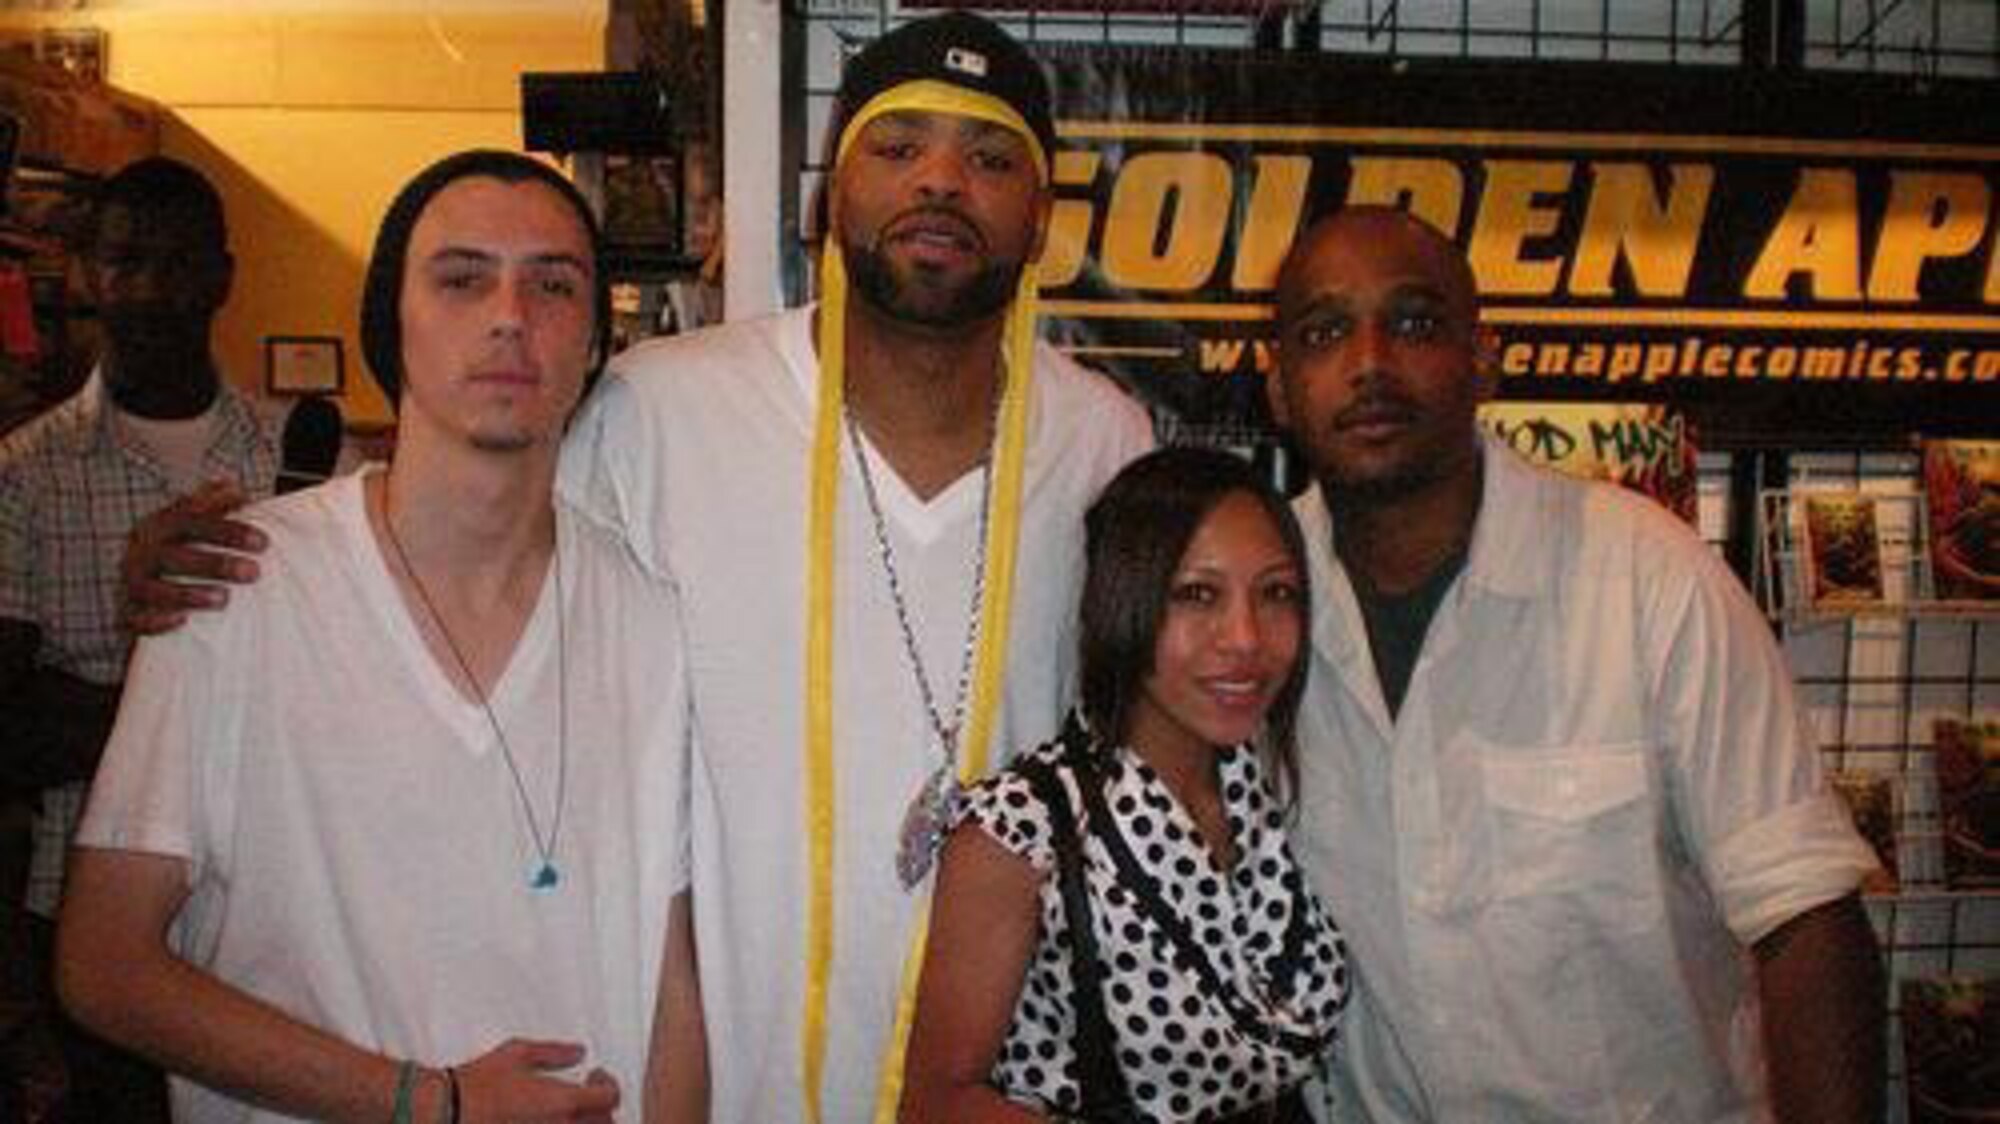 David Atchison (right) with entertainer Method Man (center) and two fans during a comic book signing for the "Method Man" comic book. Atchison wrote the story for the comic. (Courtesy photo)